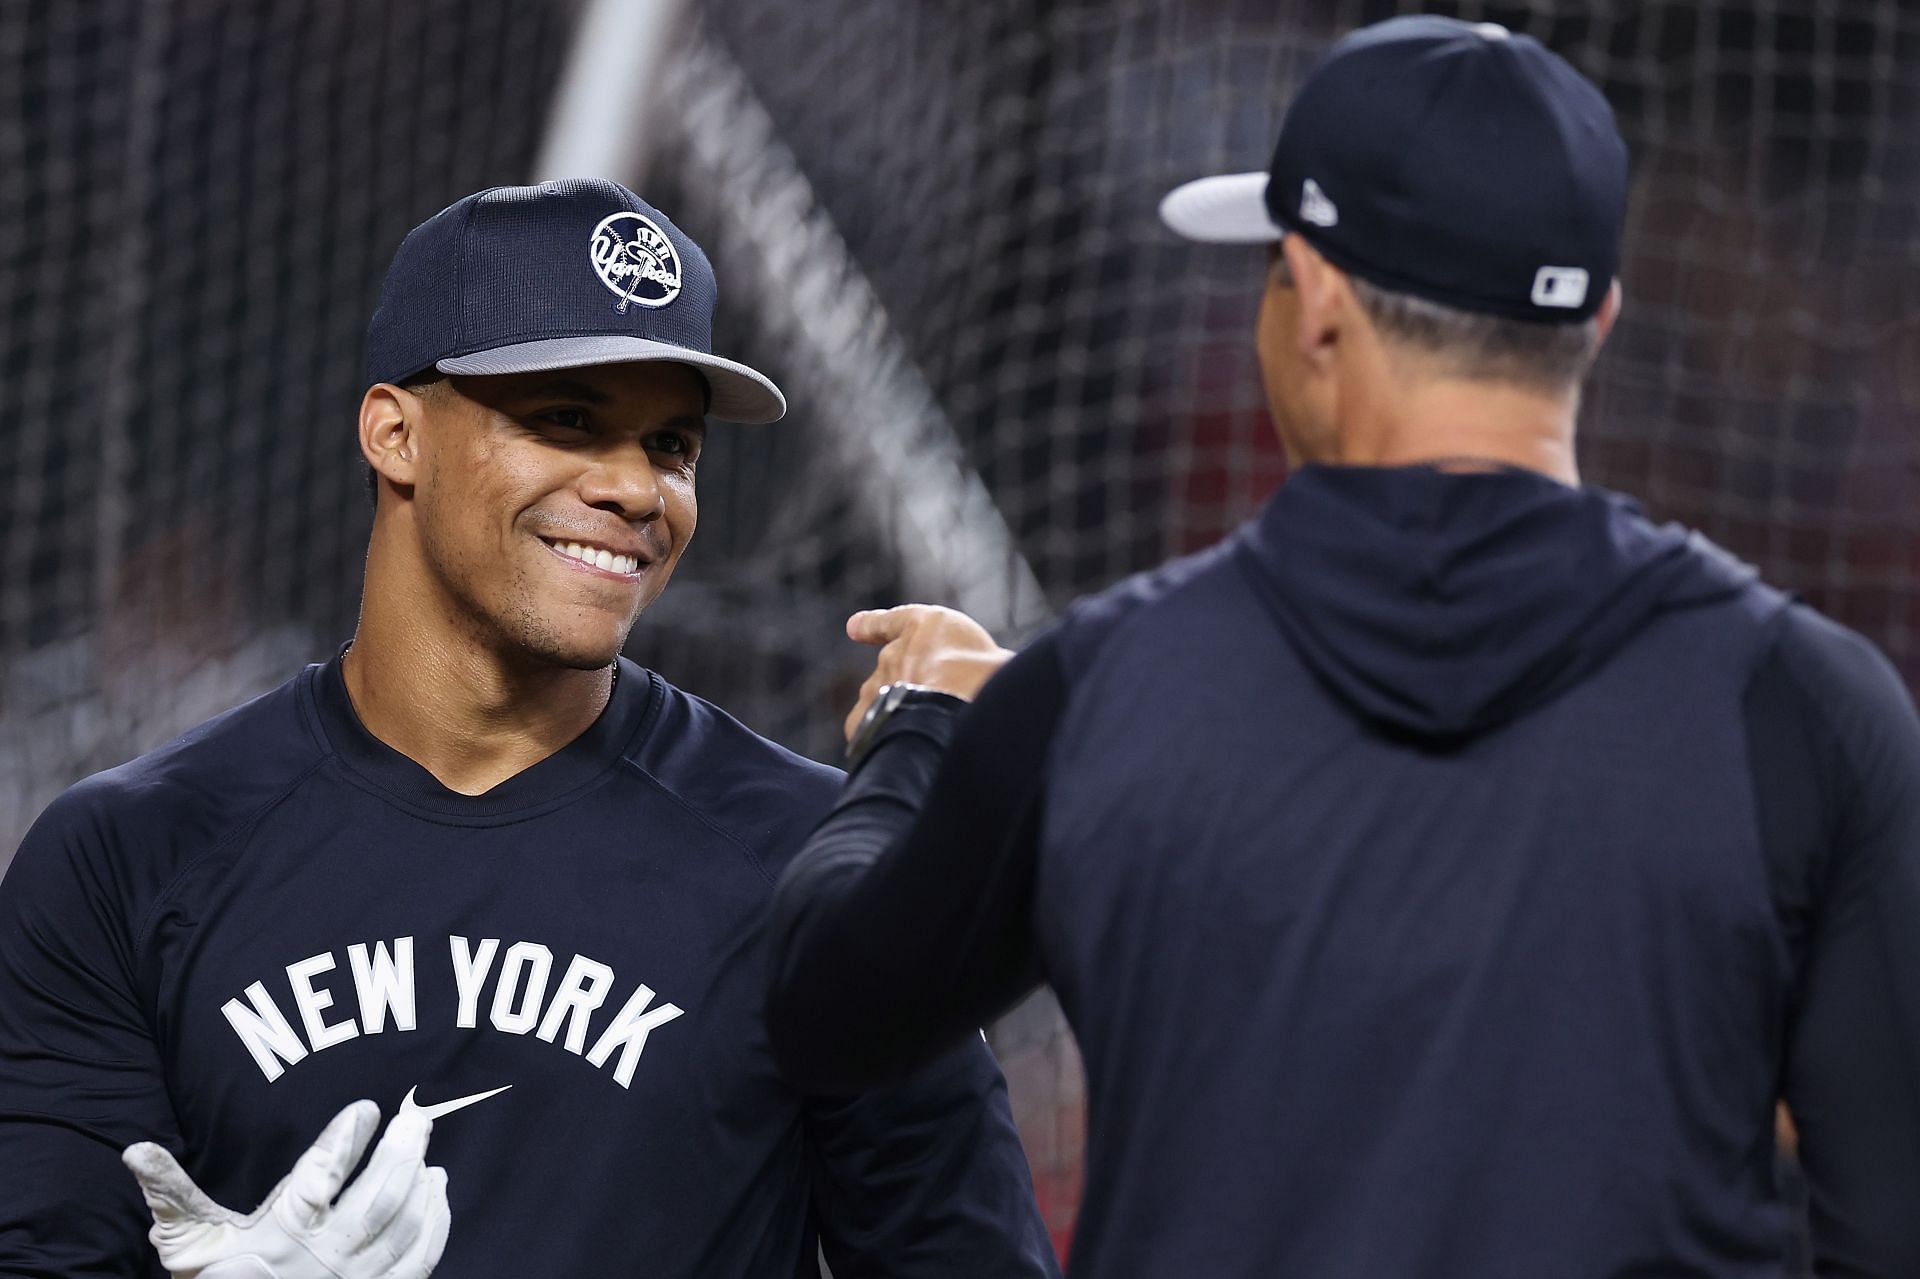 New York Yankees slugger Juan Soto and Manager Aaron Boone (Image via Getty)